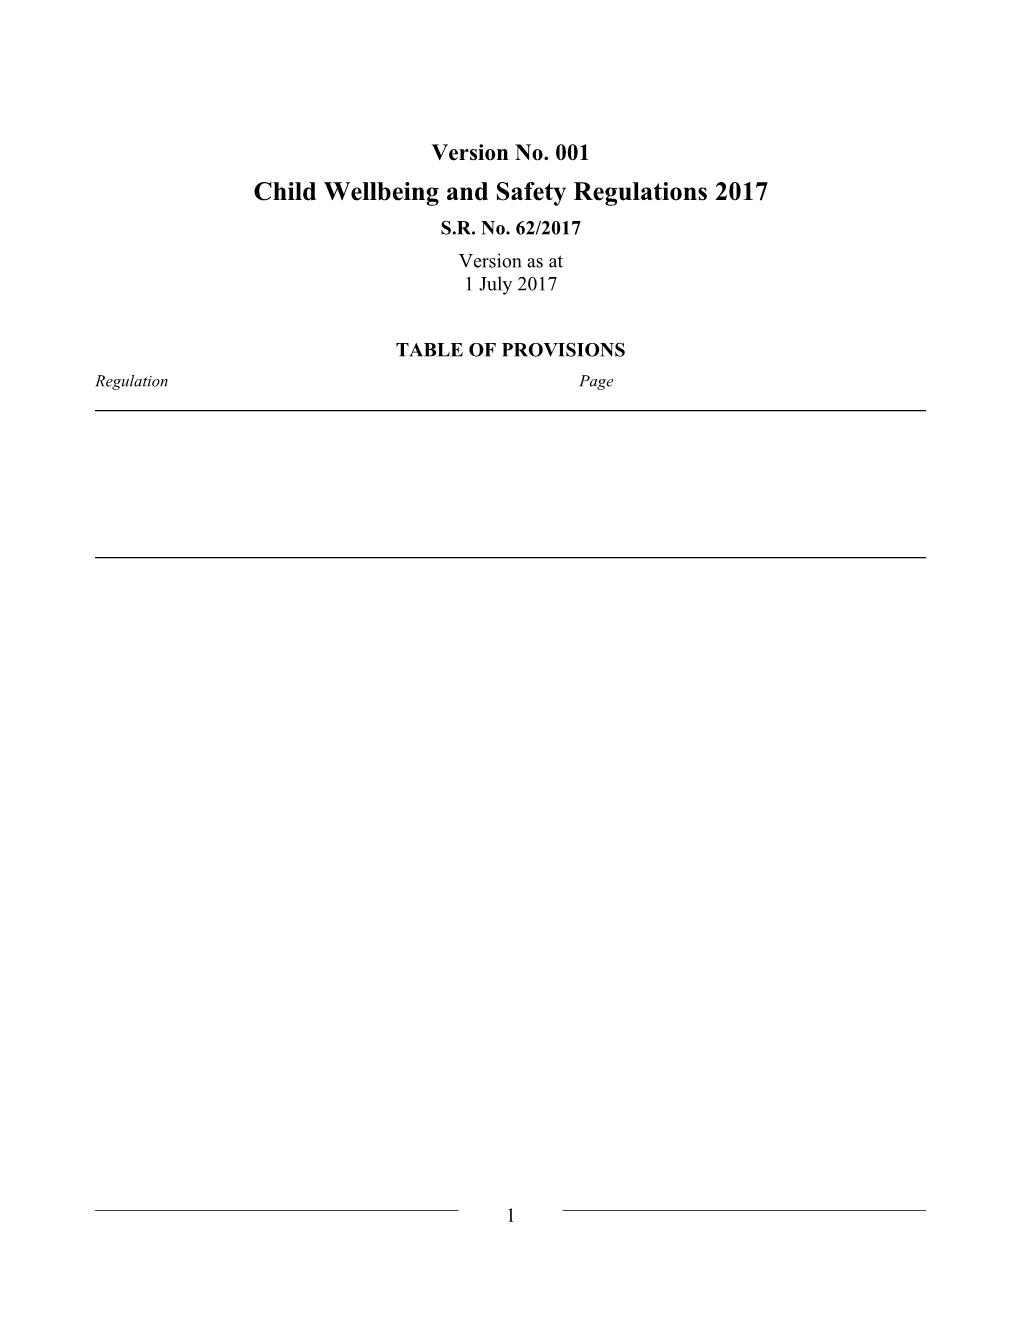 Child Wellbeing and Safety Regulations 2017